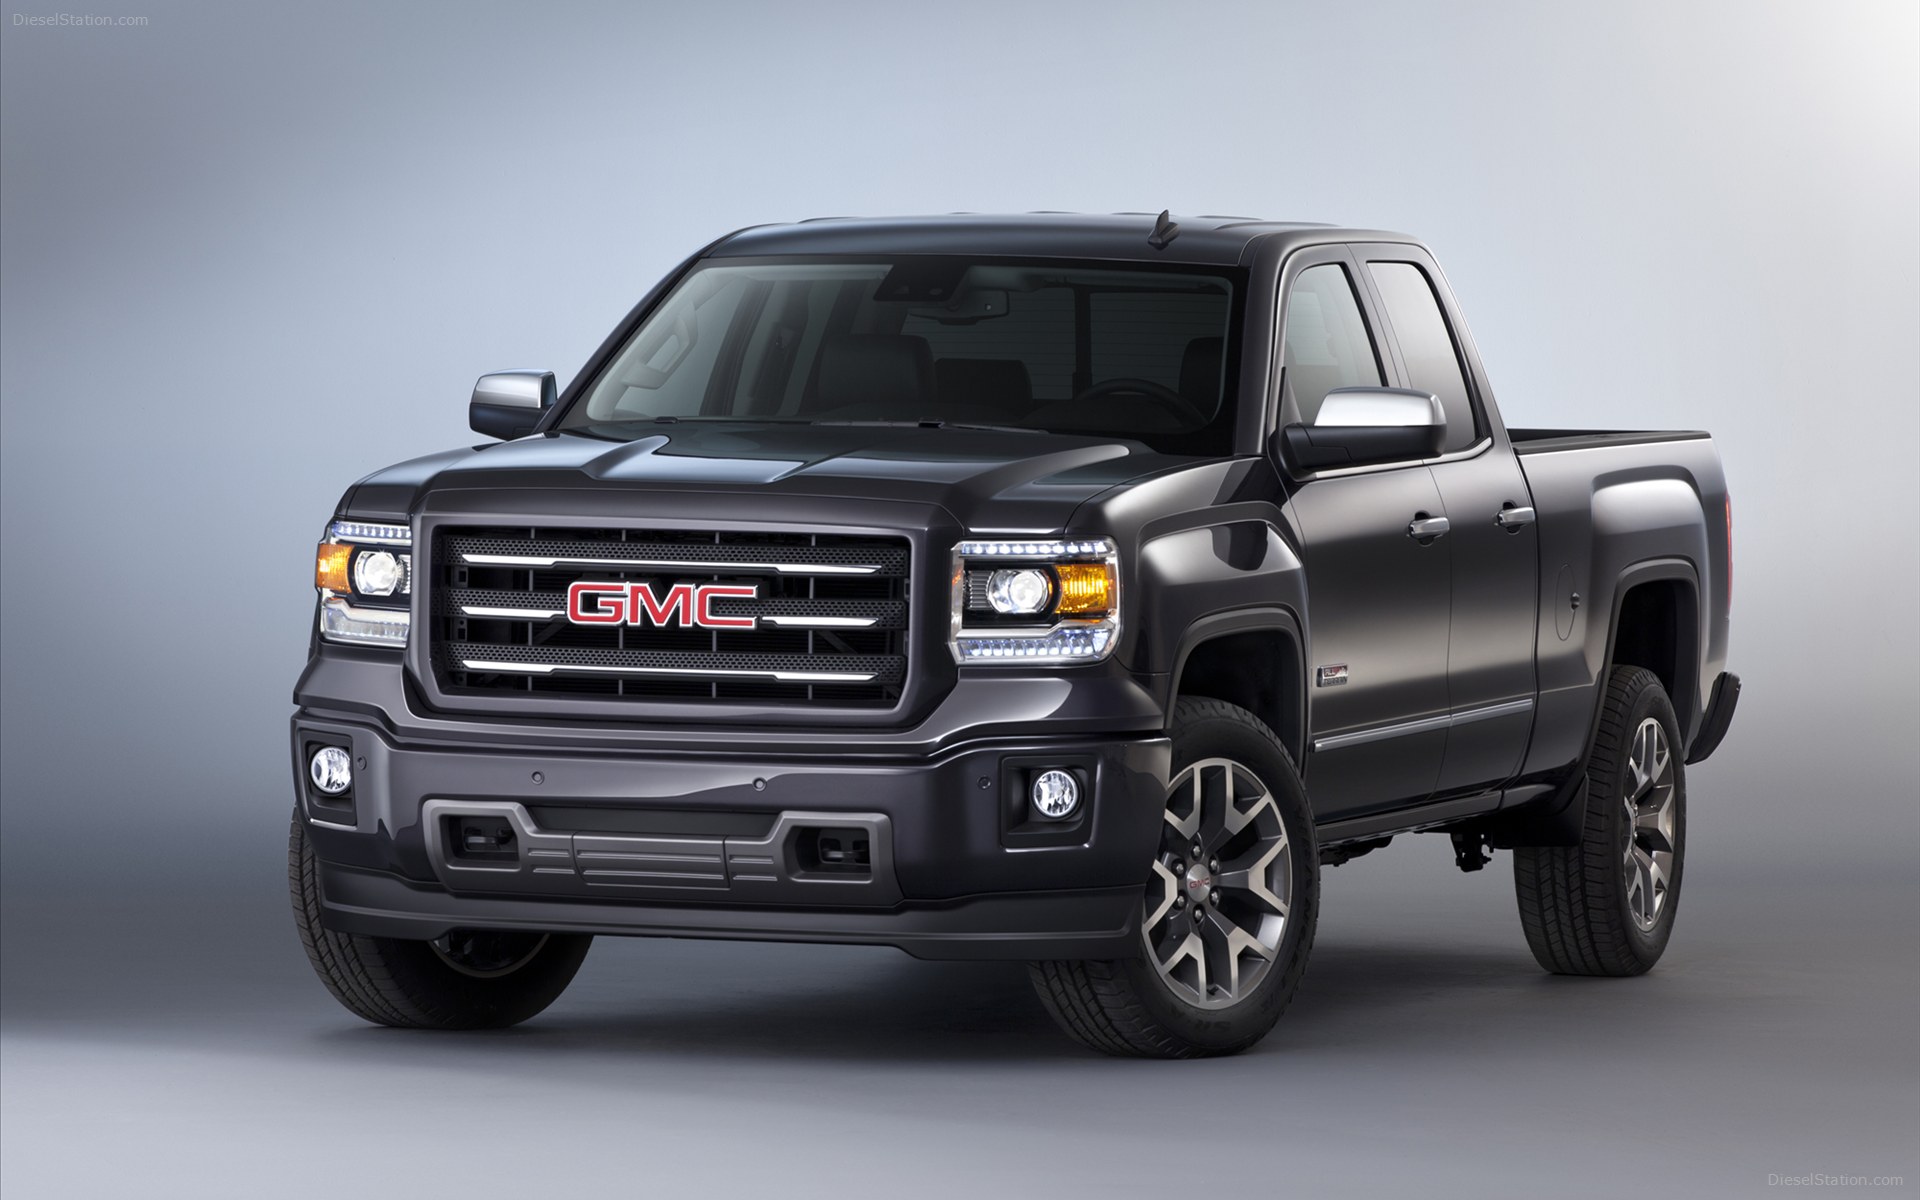 Amazing New GMC Sierra 1500 Car Automotive In 2014 Picture Image HD Wallpaper